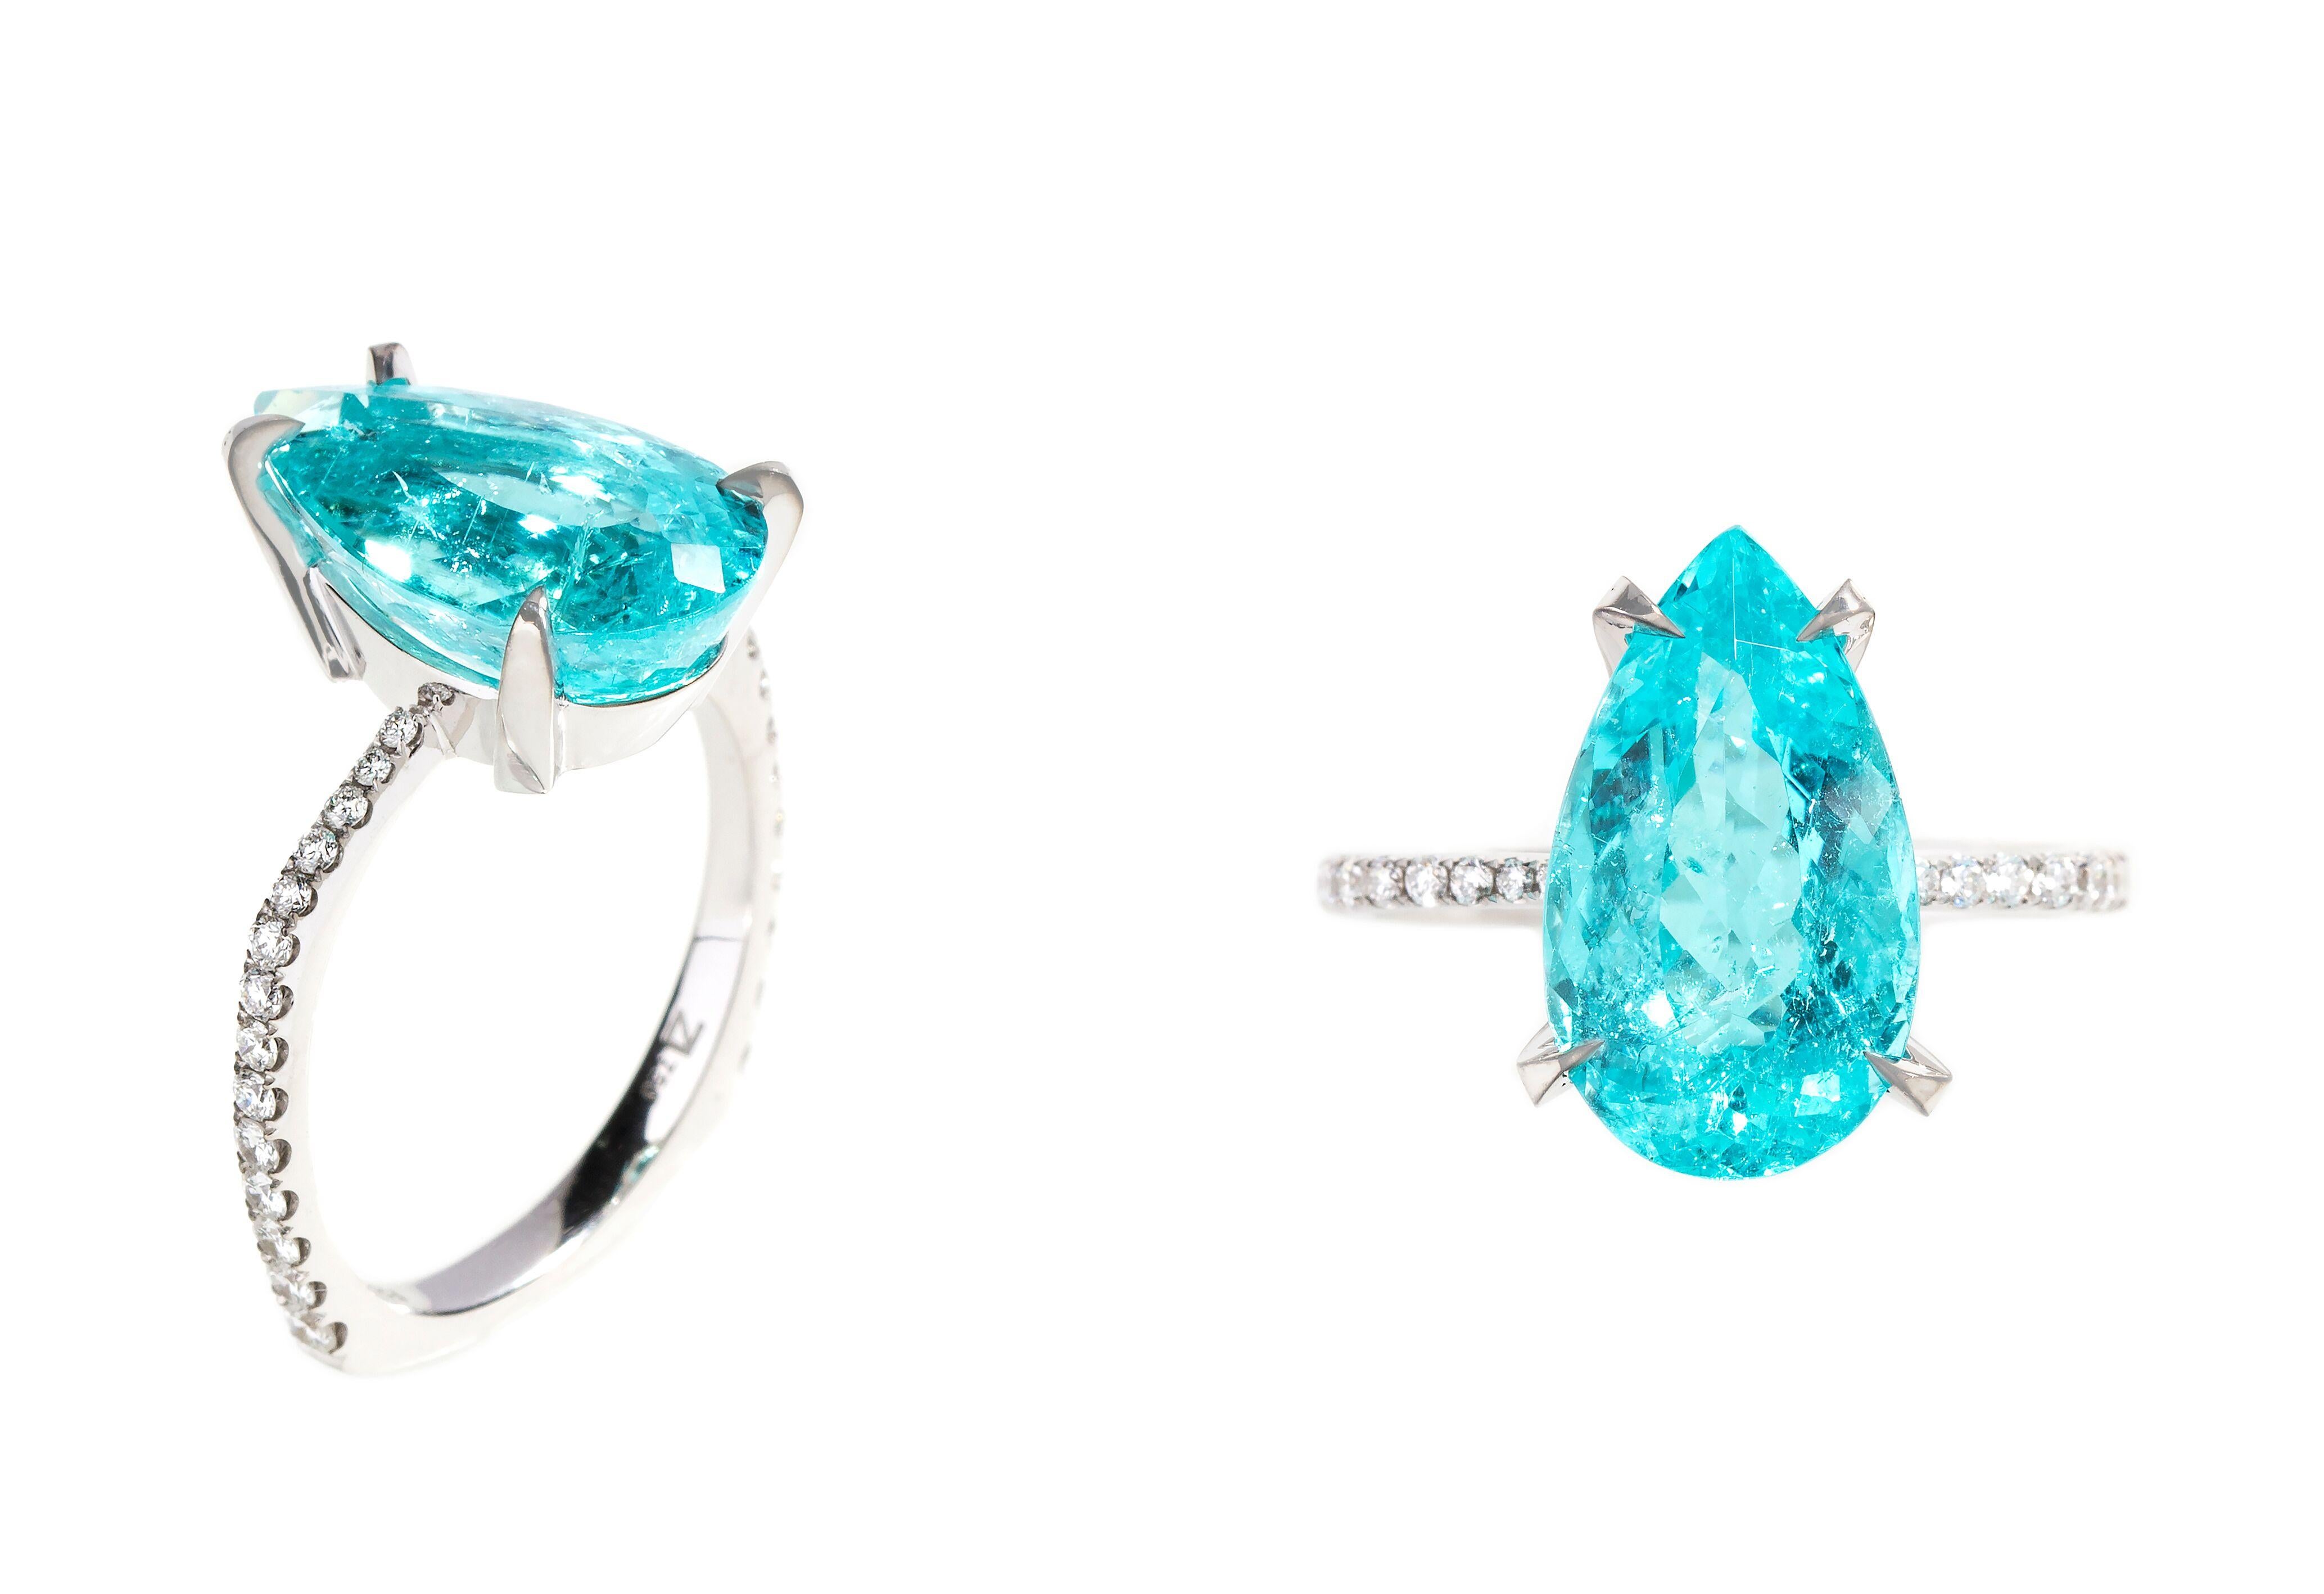 Designed exclusively by Ara Vartanian, this 18 Karat White Gold Ring features an IBGM Certified pear-shaped modified brilliant cut 5.98 Carat Paraiba Tourmaline with round brilliant White Diamonds (0.33 Carat) adorning the band.

Selecting the